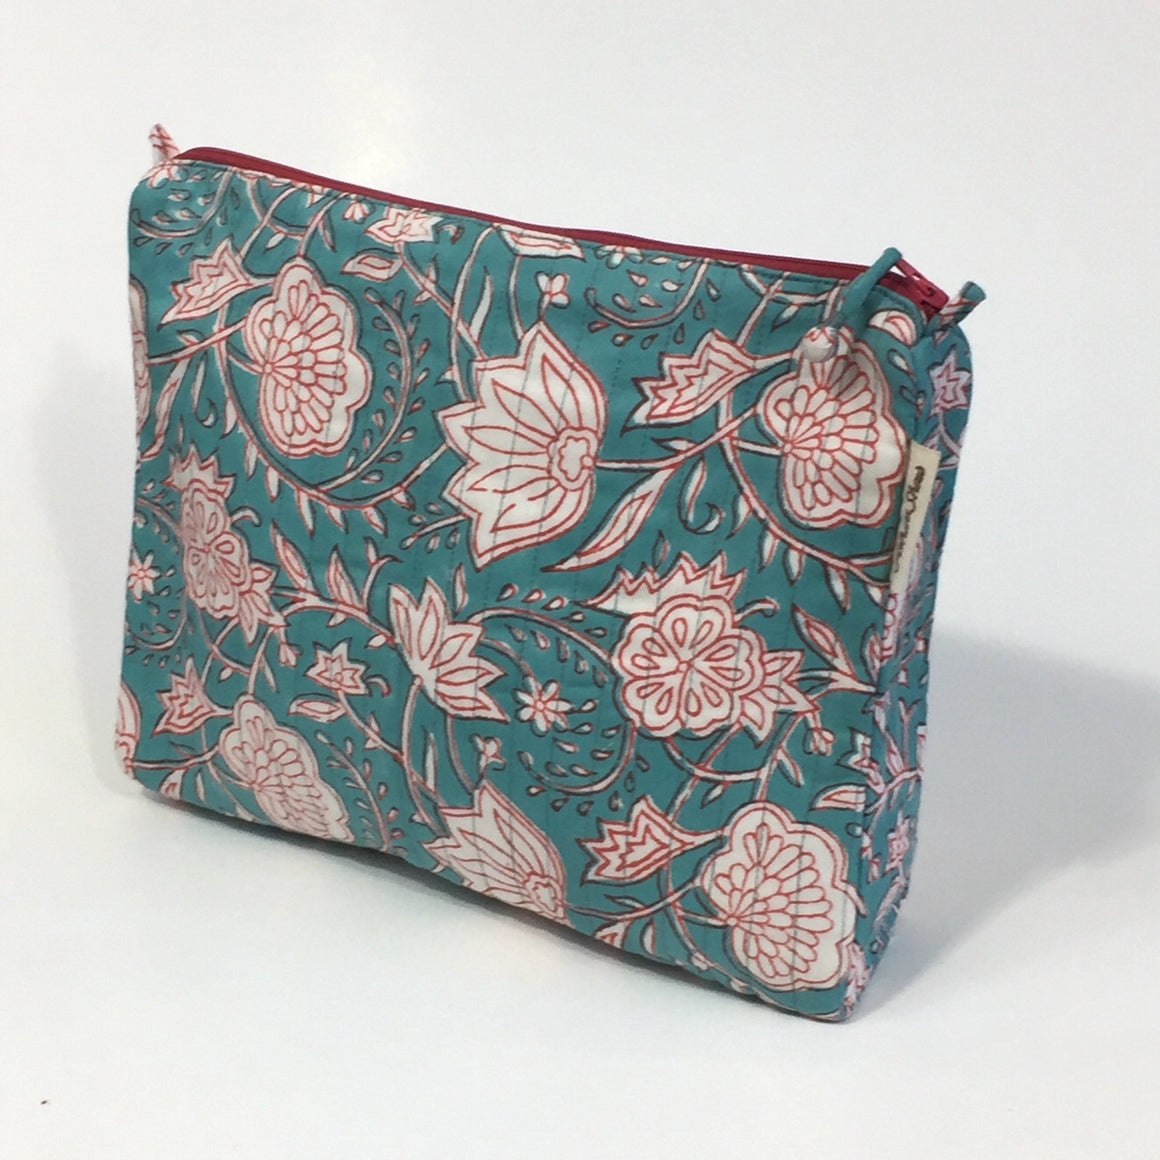 Travel Bag in Maui Turquoise Hand Block Print, Compact Size